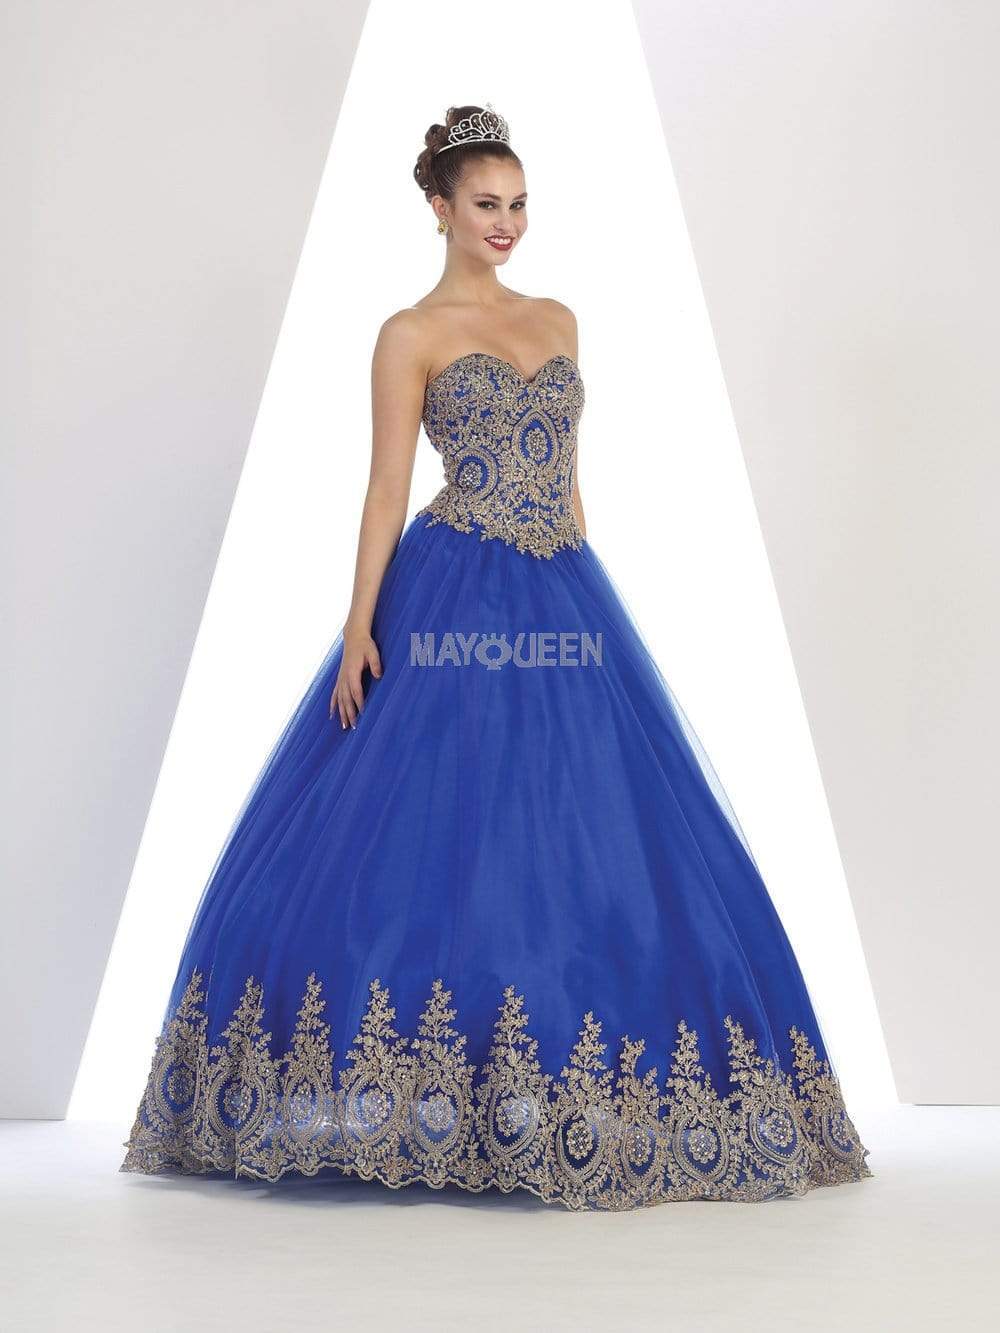 May Queen - LK73 Strapless Sweetheart Gold Lace Embellished Ballgown Ball Gowns 2 / Royal-Blue